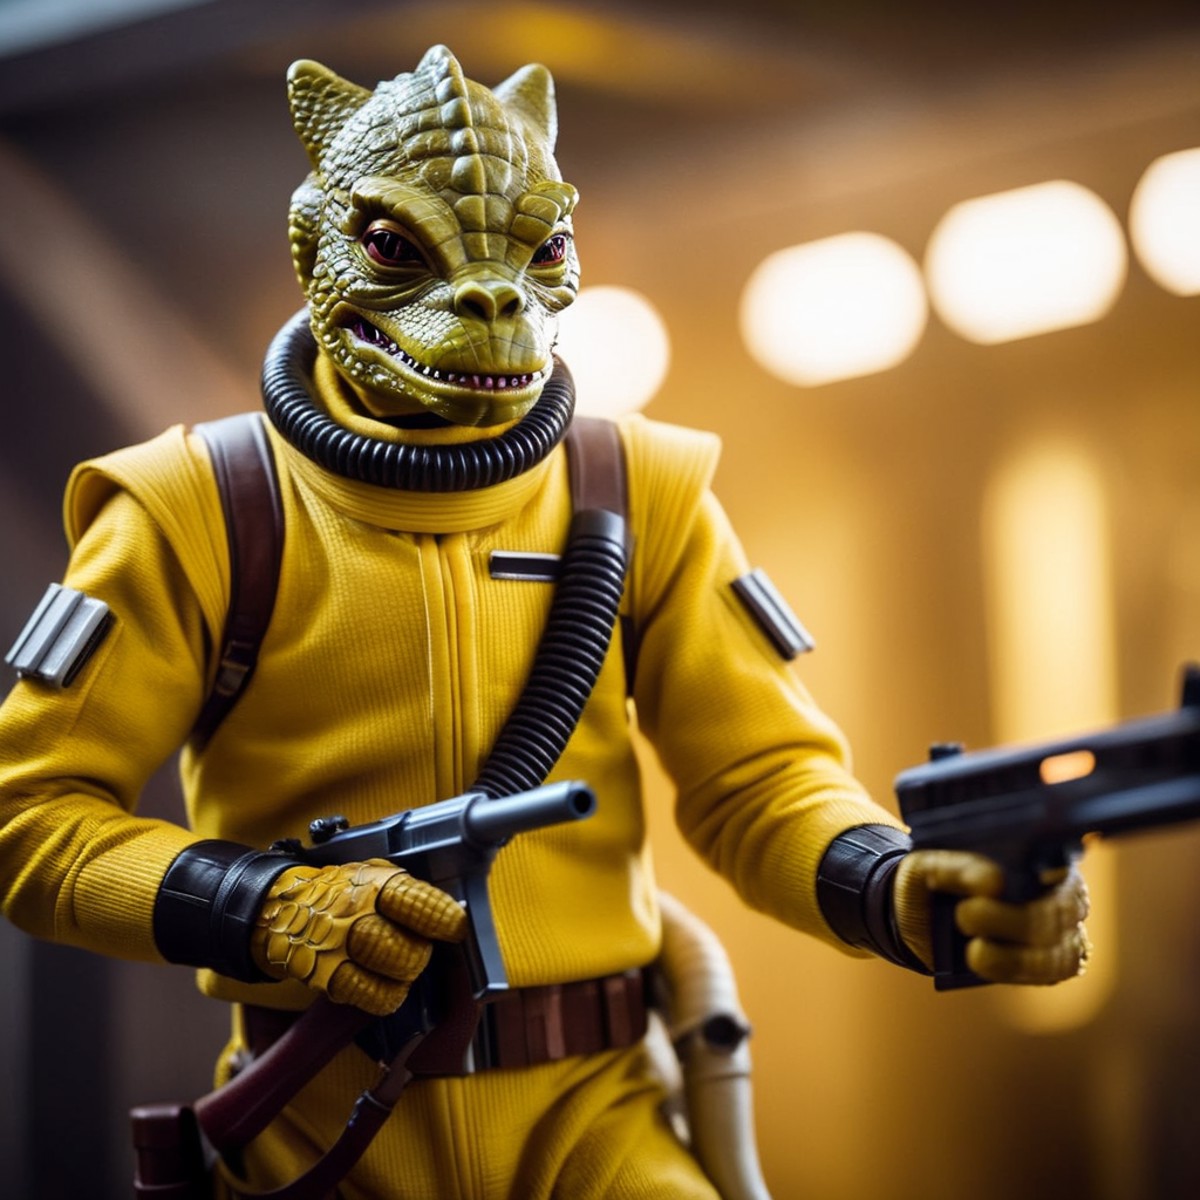 cinematic film still of  <lora:Bossk:1.2>
Bossk a reptilian creature in a yellow outfit holding a gun in star wars univers...